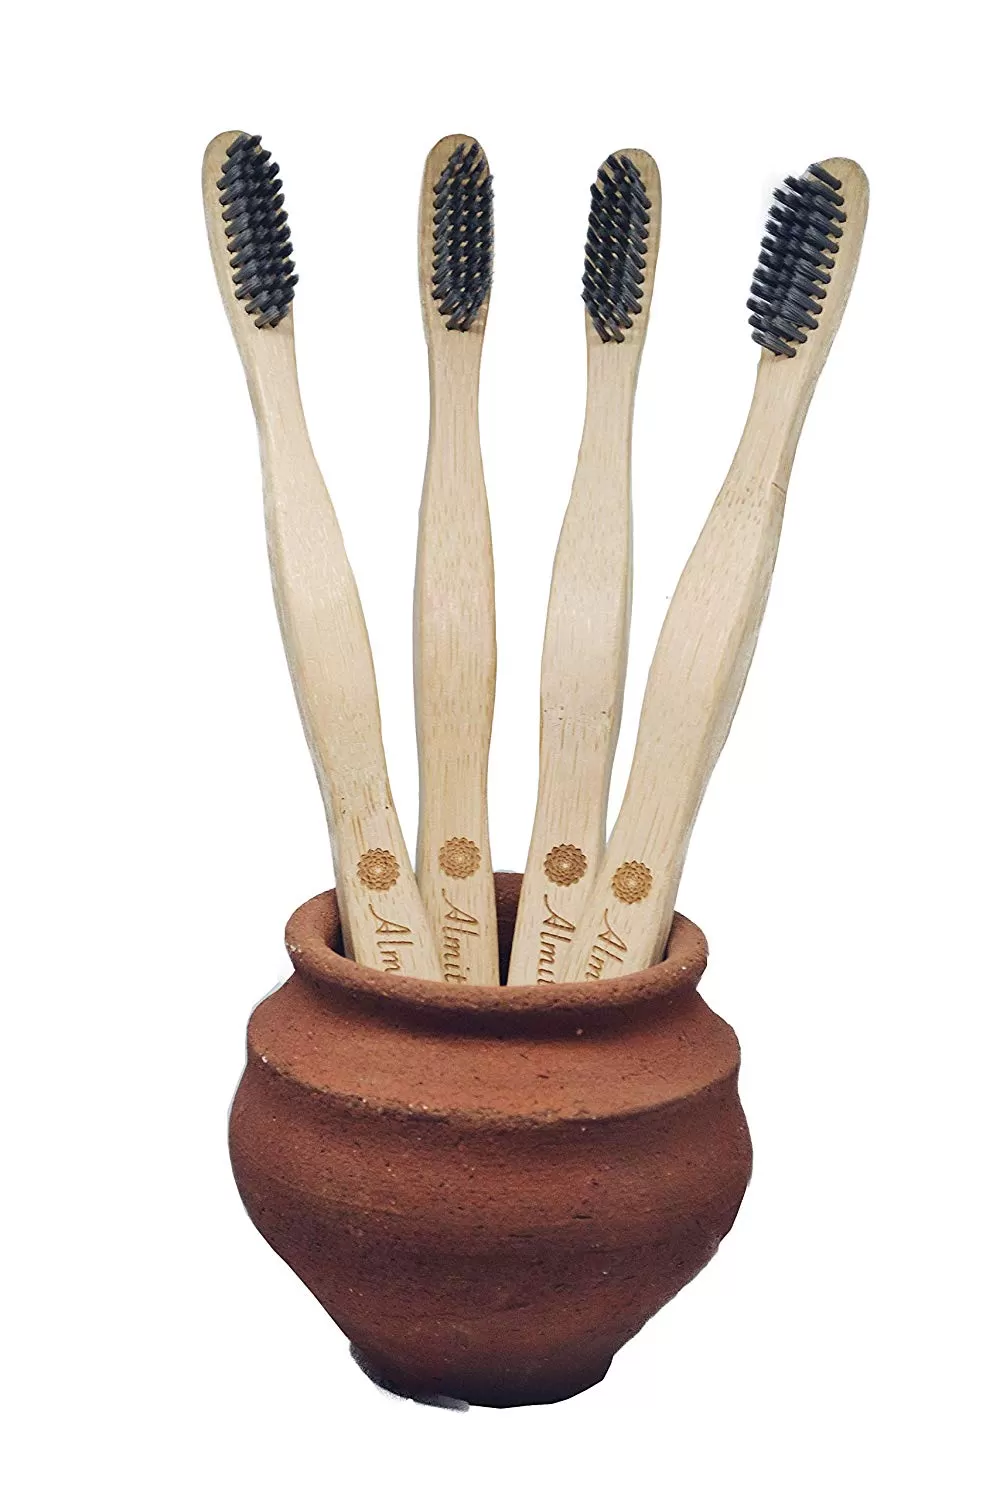 Bamboo Charcoal Toothbrush by Almitra Sustainables, 2 image